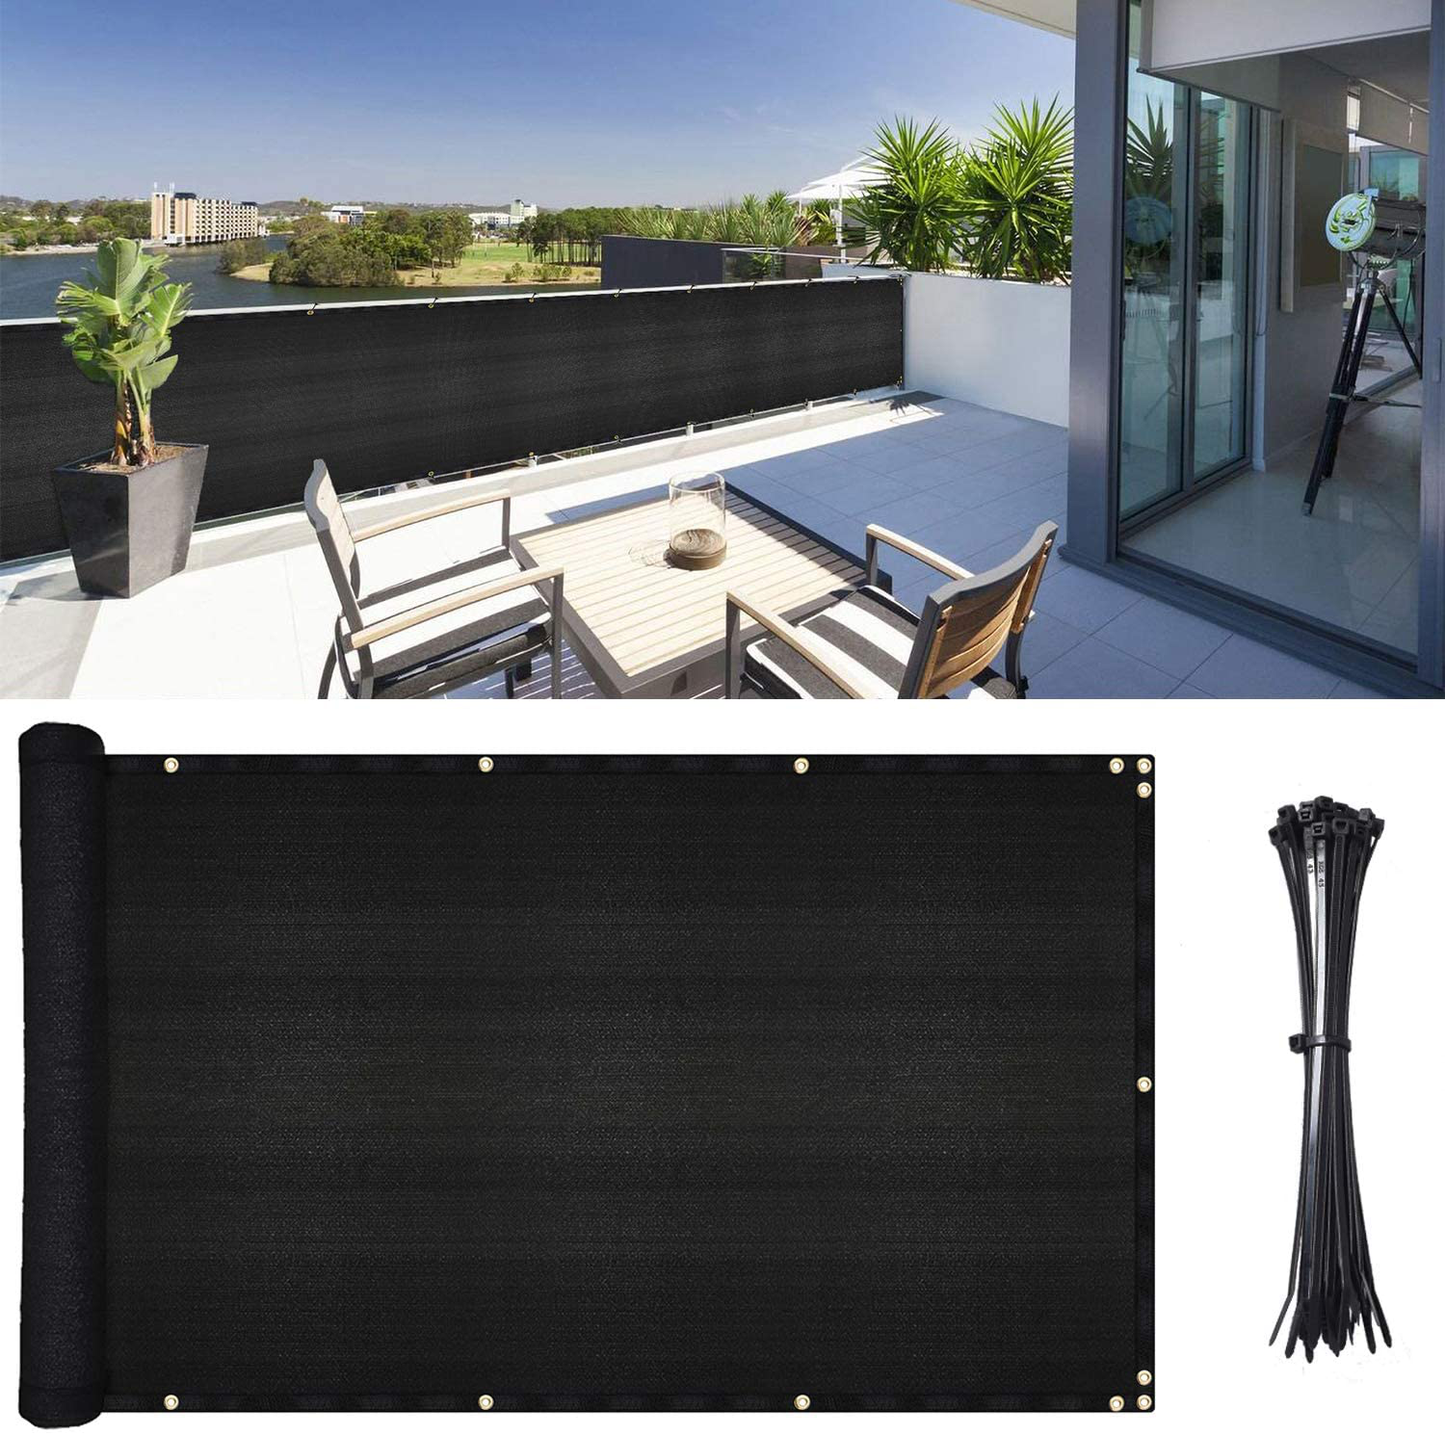 DearHouse Balcony Privacy Screen Cover, 3.5ft x16.5ft Fence Windscreen for Porch Deck, Outdoor, Backyard, Patio, Balcony to Cover Sun Shade, UV-Proof, Weather-Resistant, Includes 35 pc Cable Ties